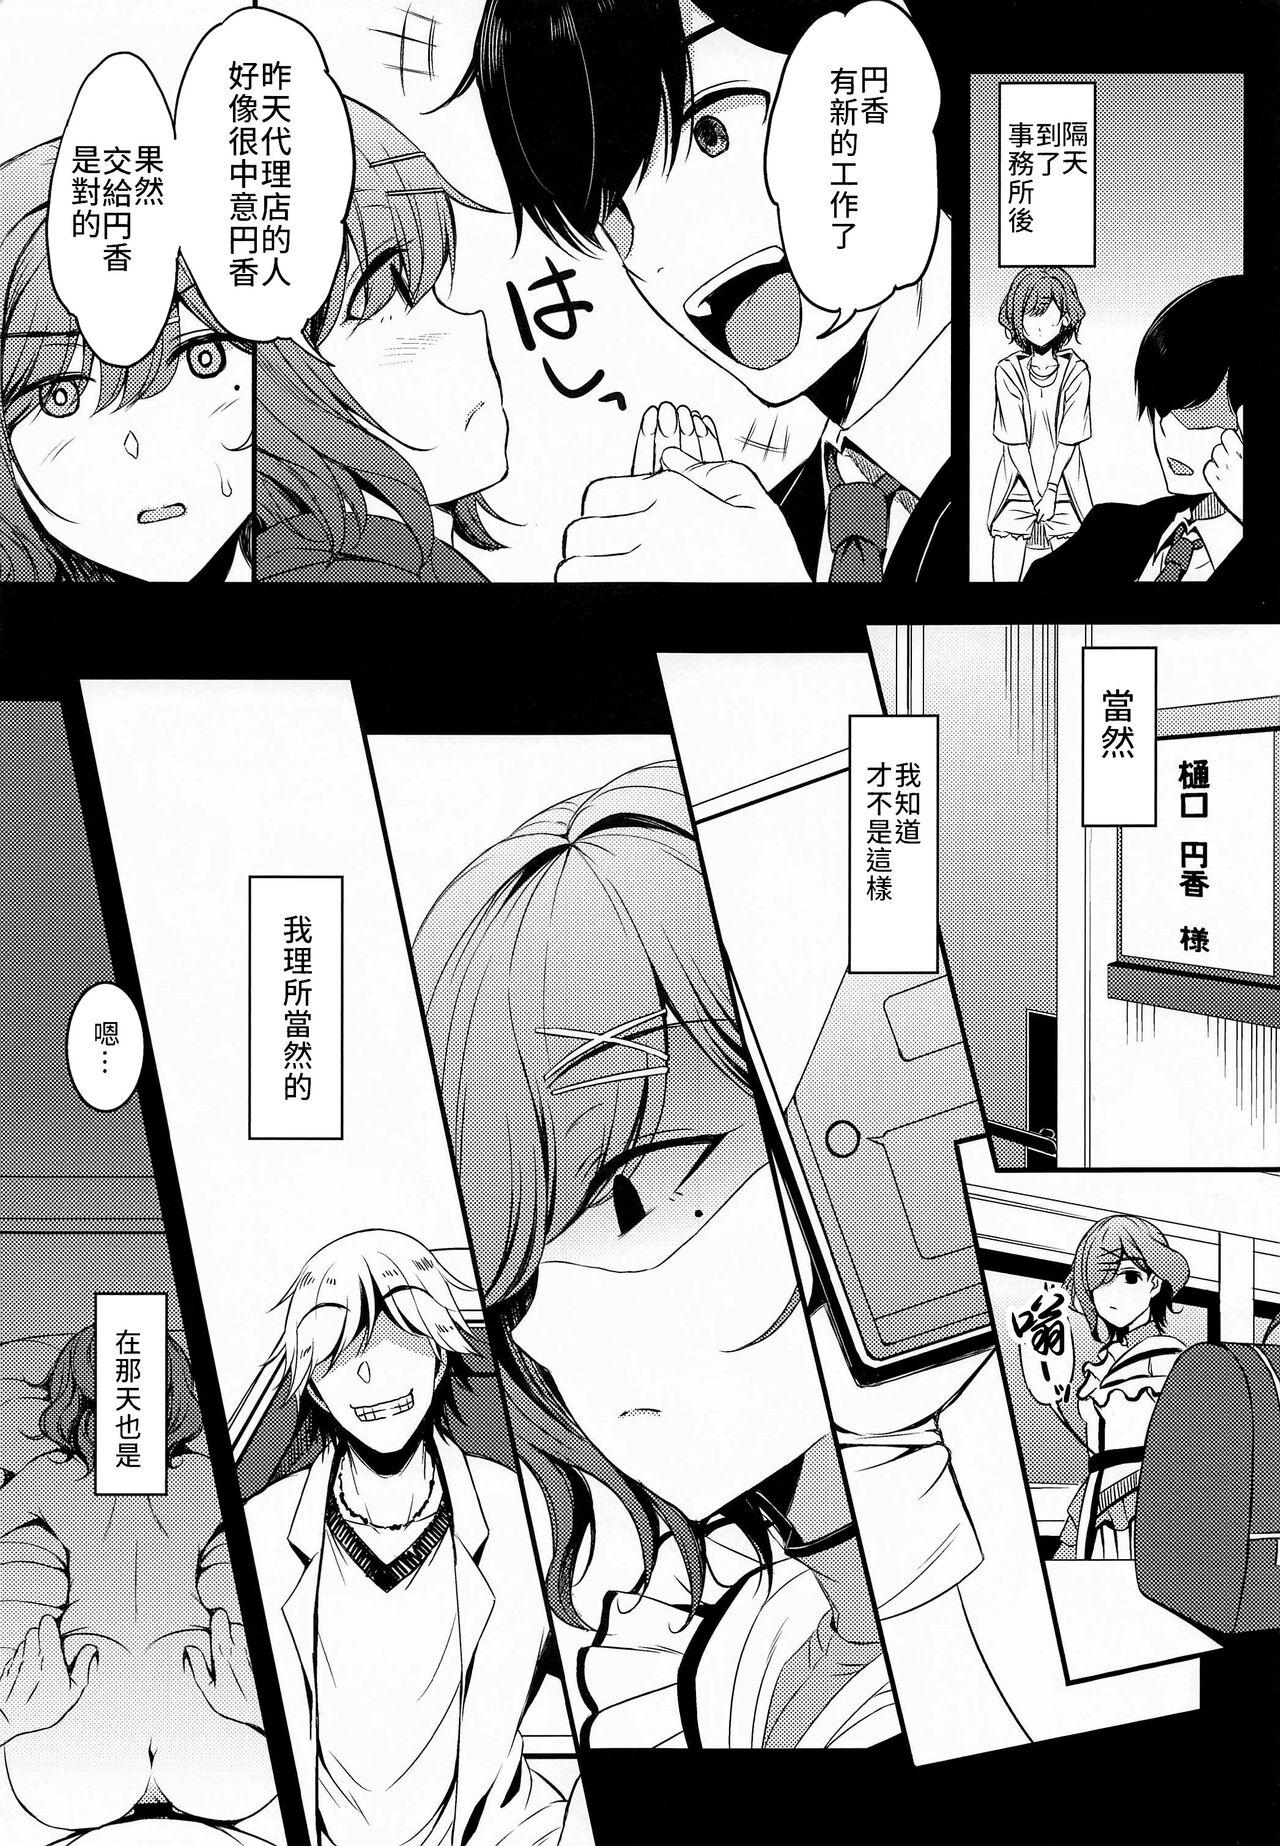 Consolo madocil - The idolmaster Asstomouth - Page 8